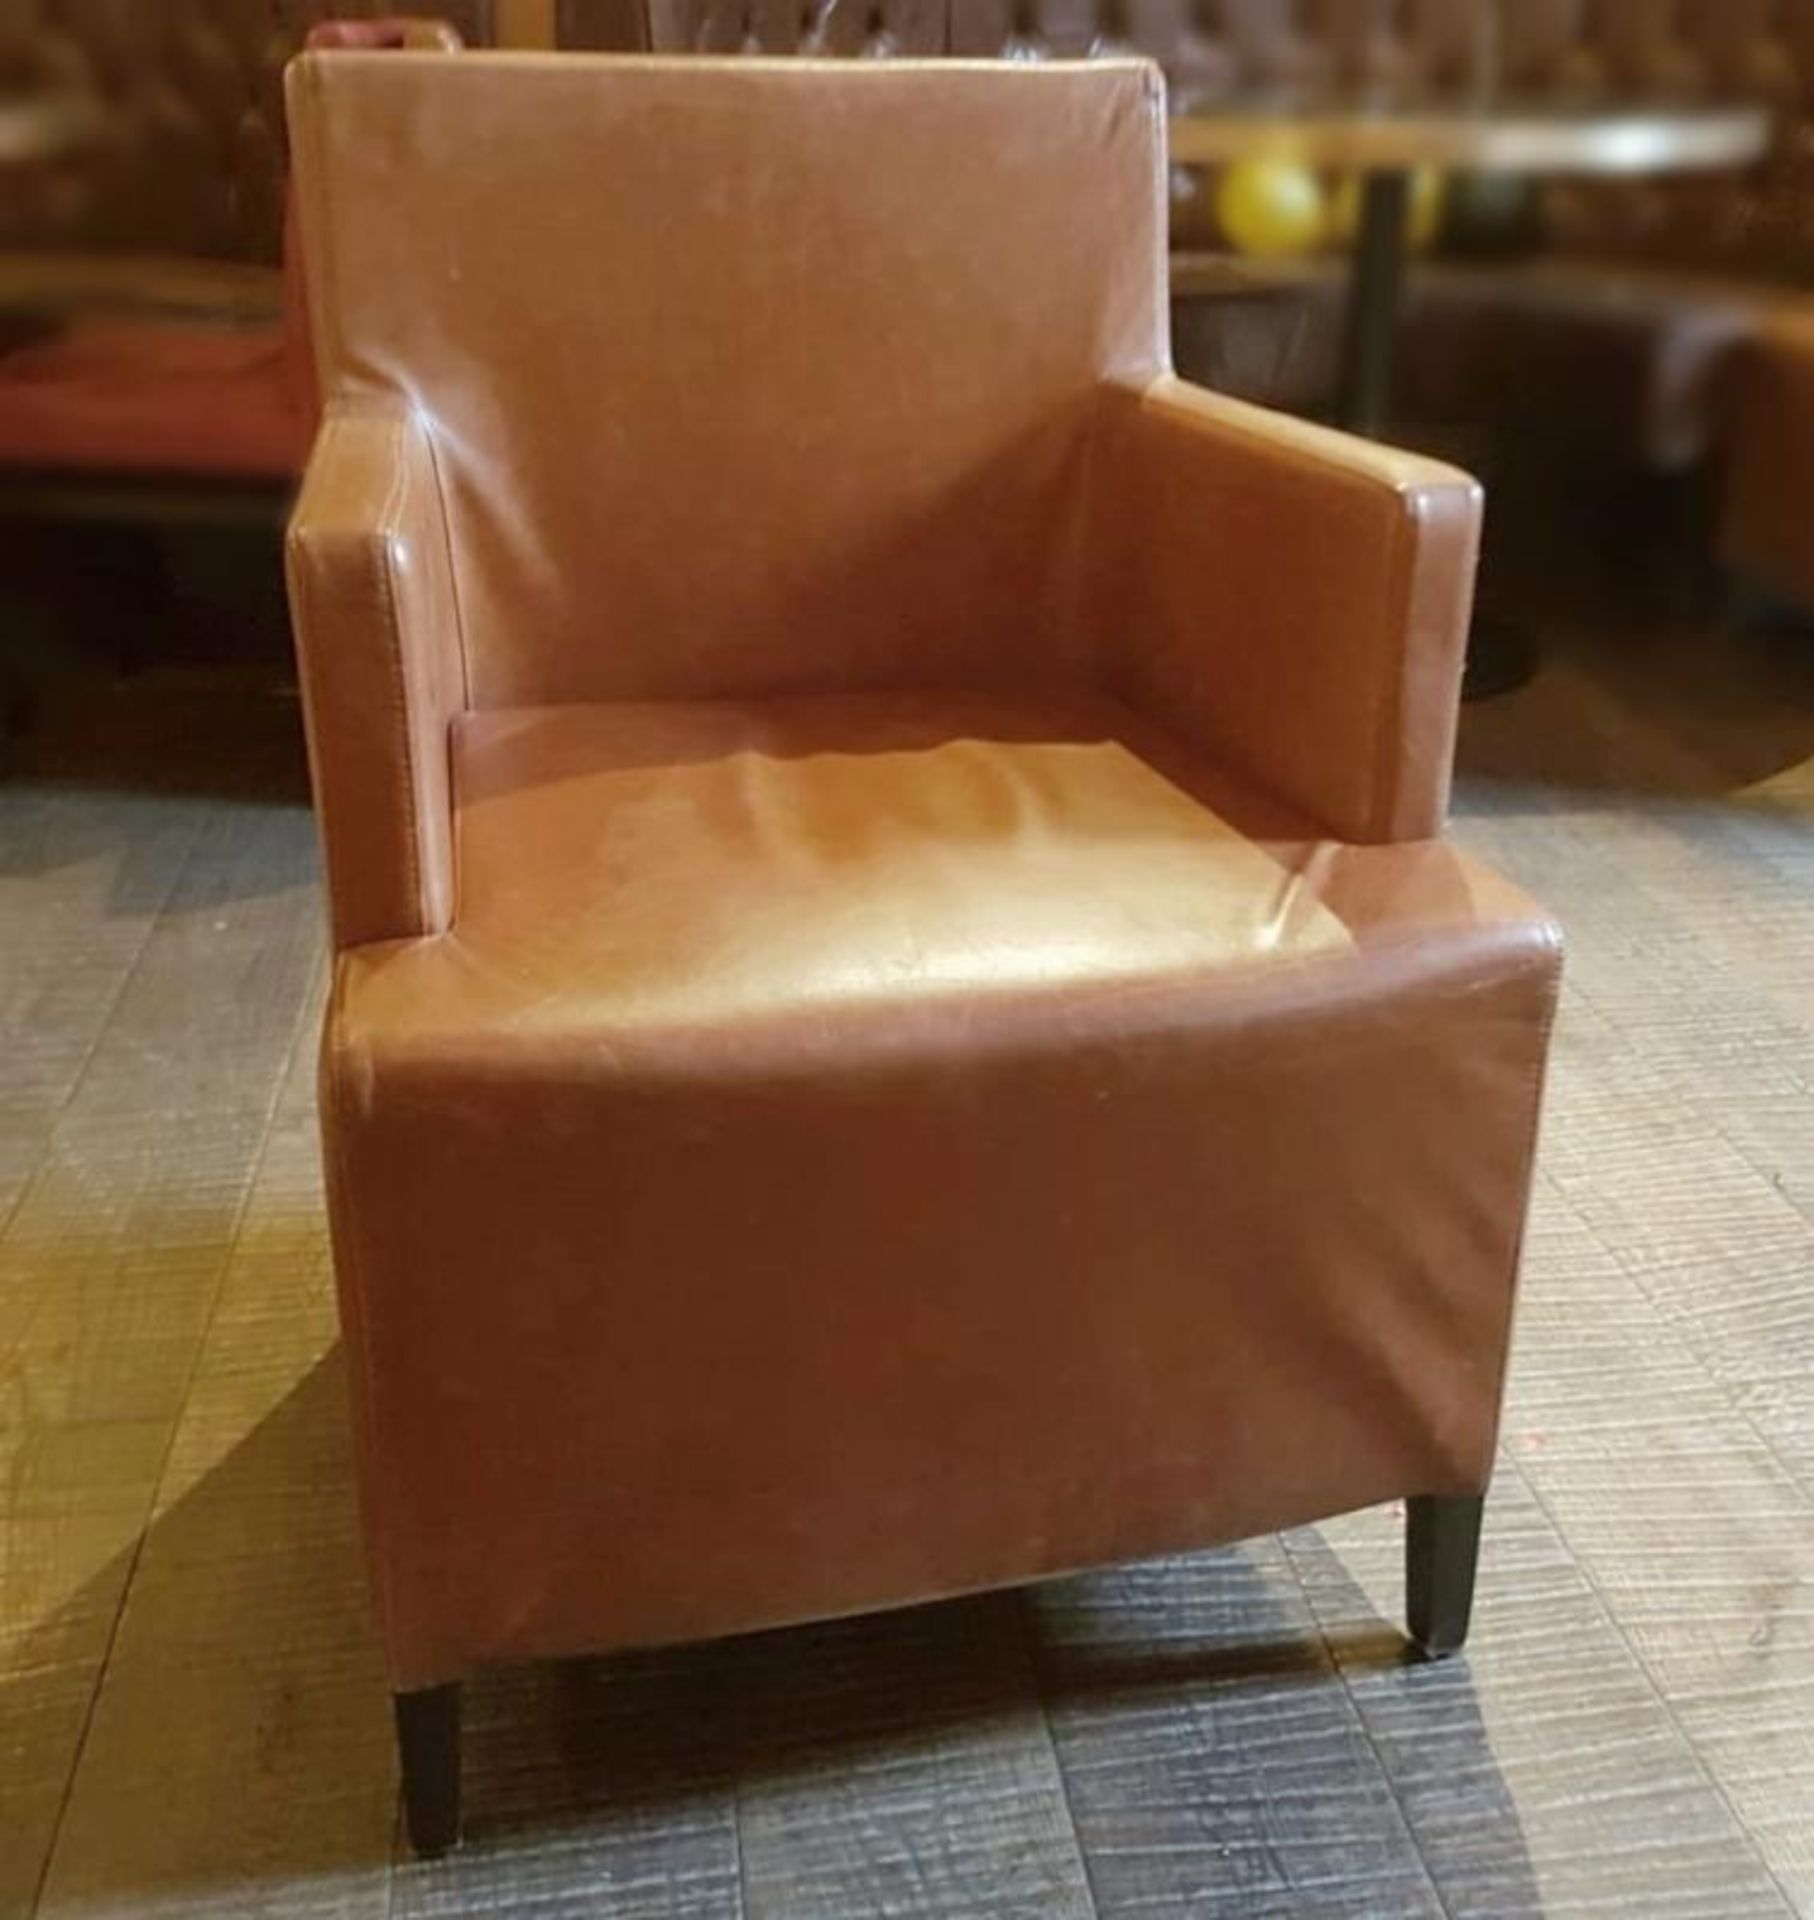 1 x Large Armchair Upholstered In Tan Leather - Recently Removed From A City Centre Steakhouse Resta